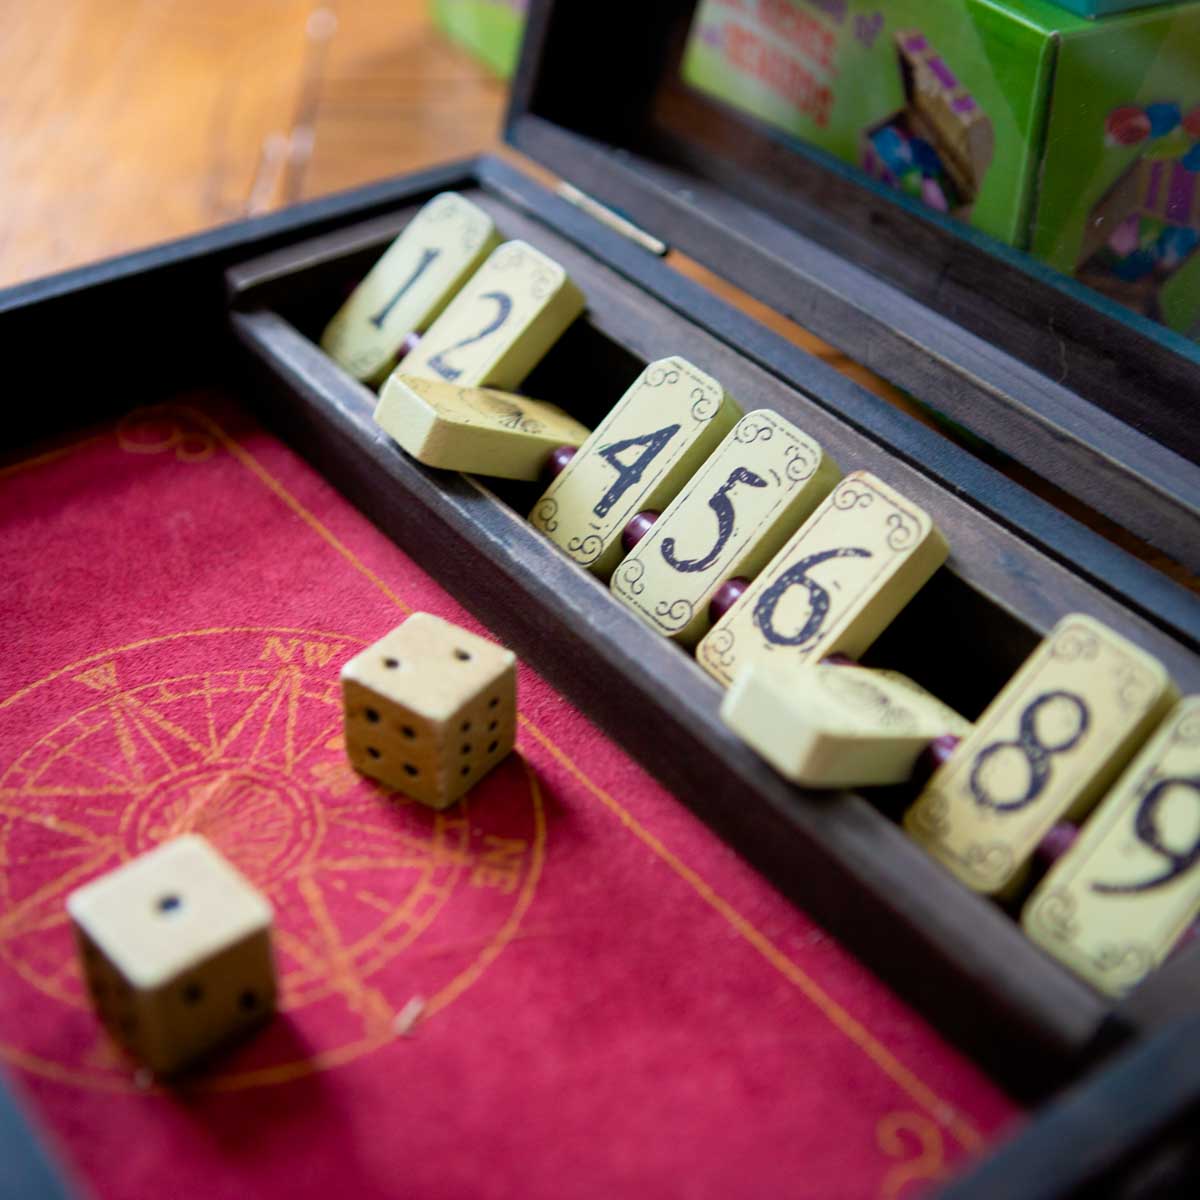 Shut the Box, a dice and number game.